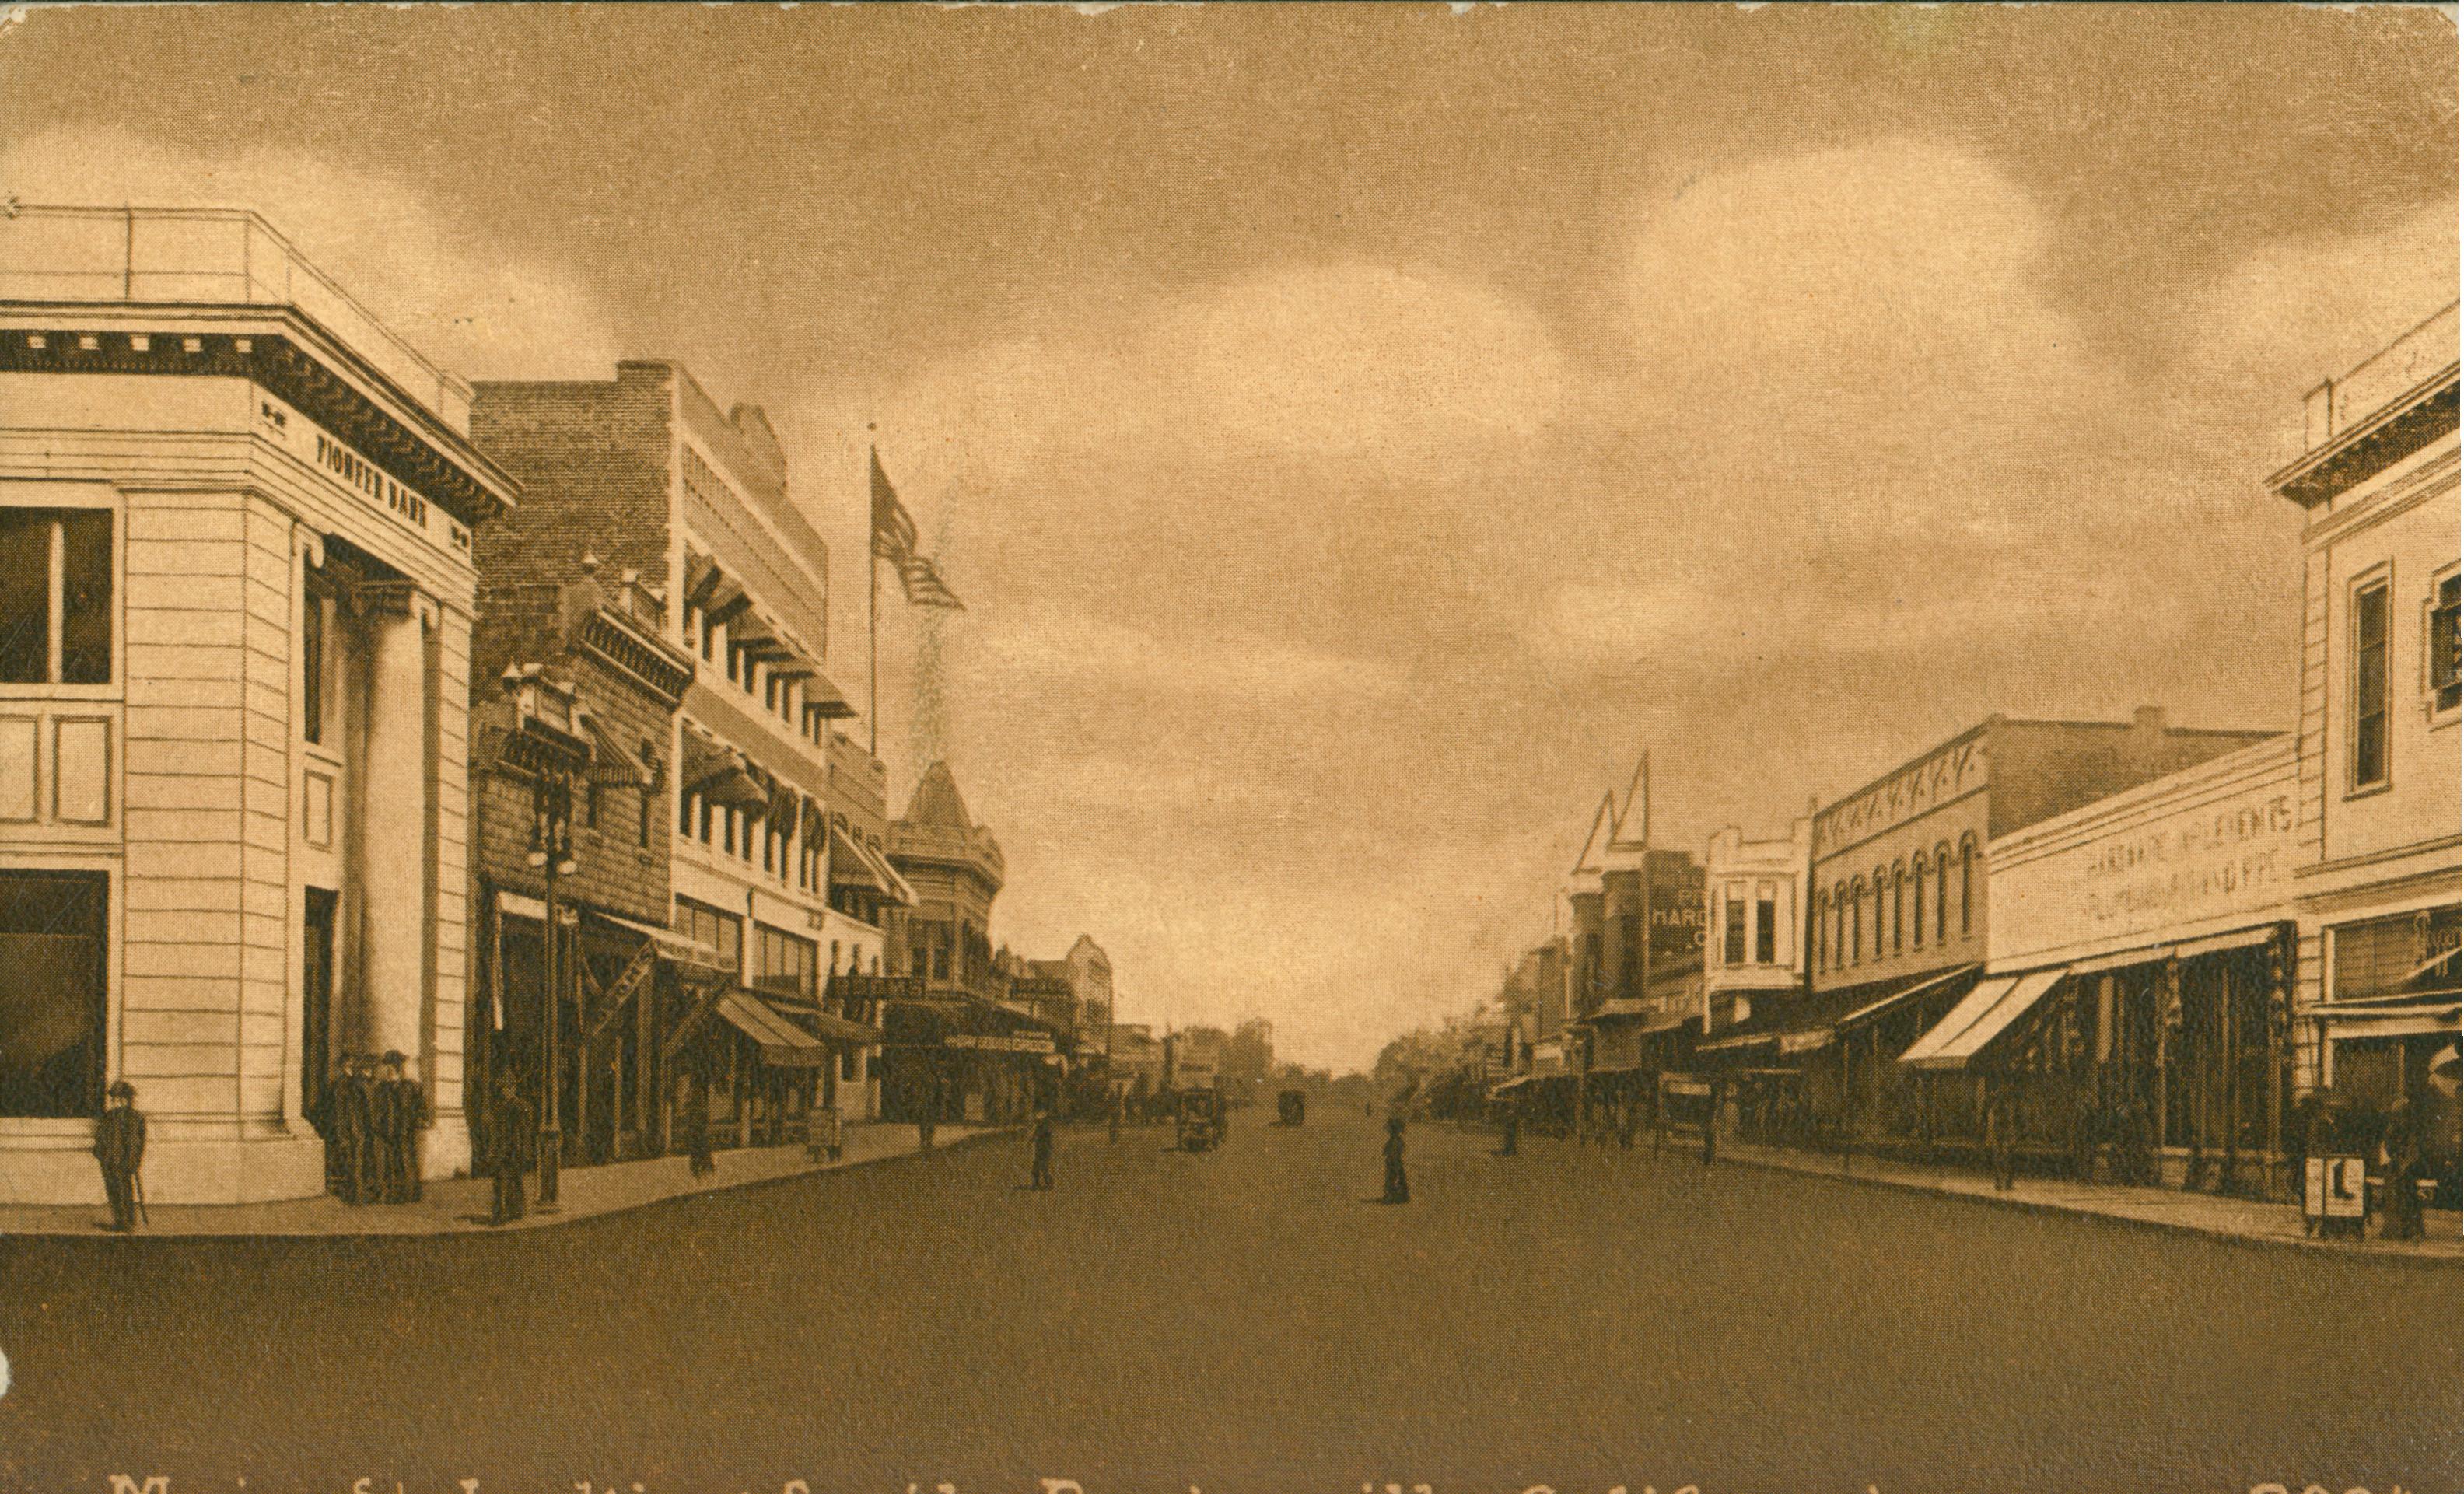 Shows Main Street in Porterville lined with buildings